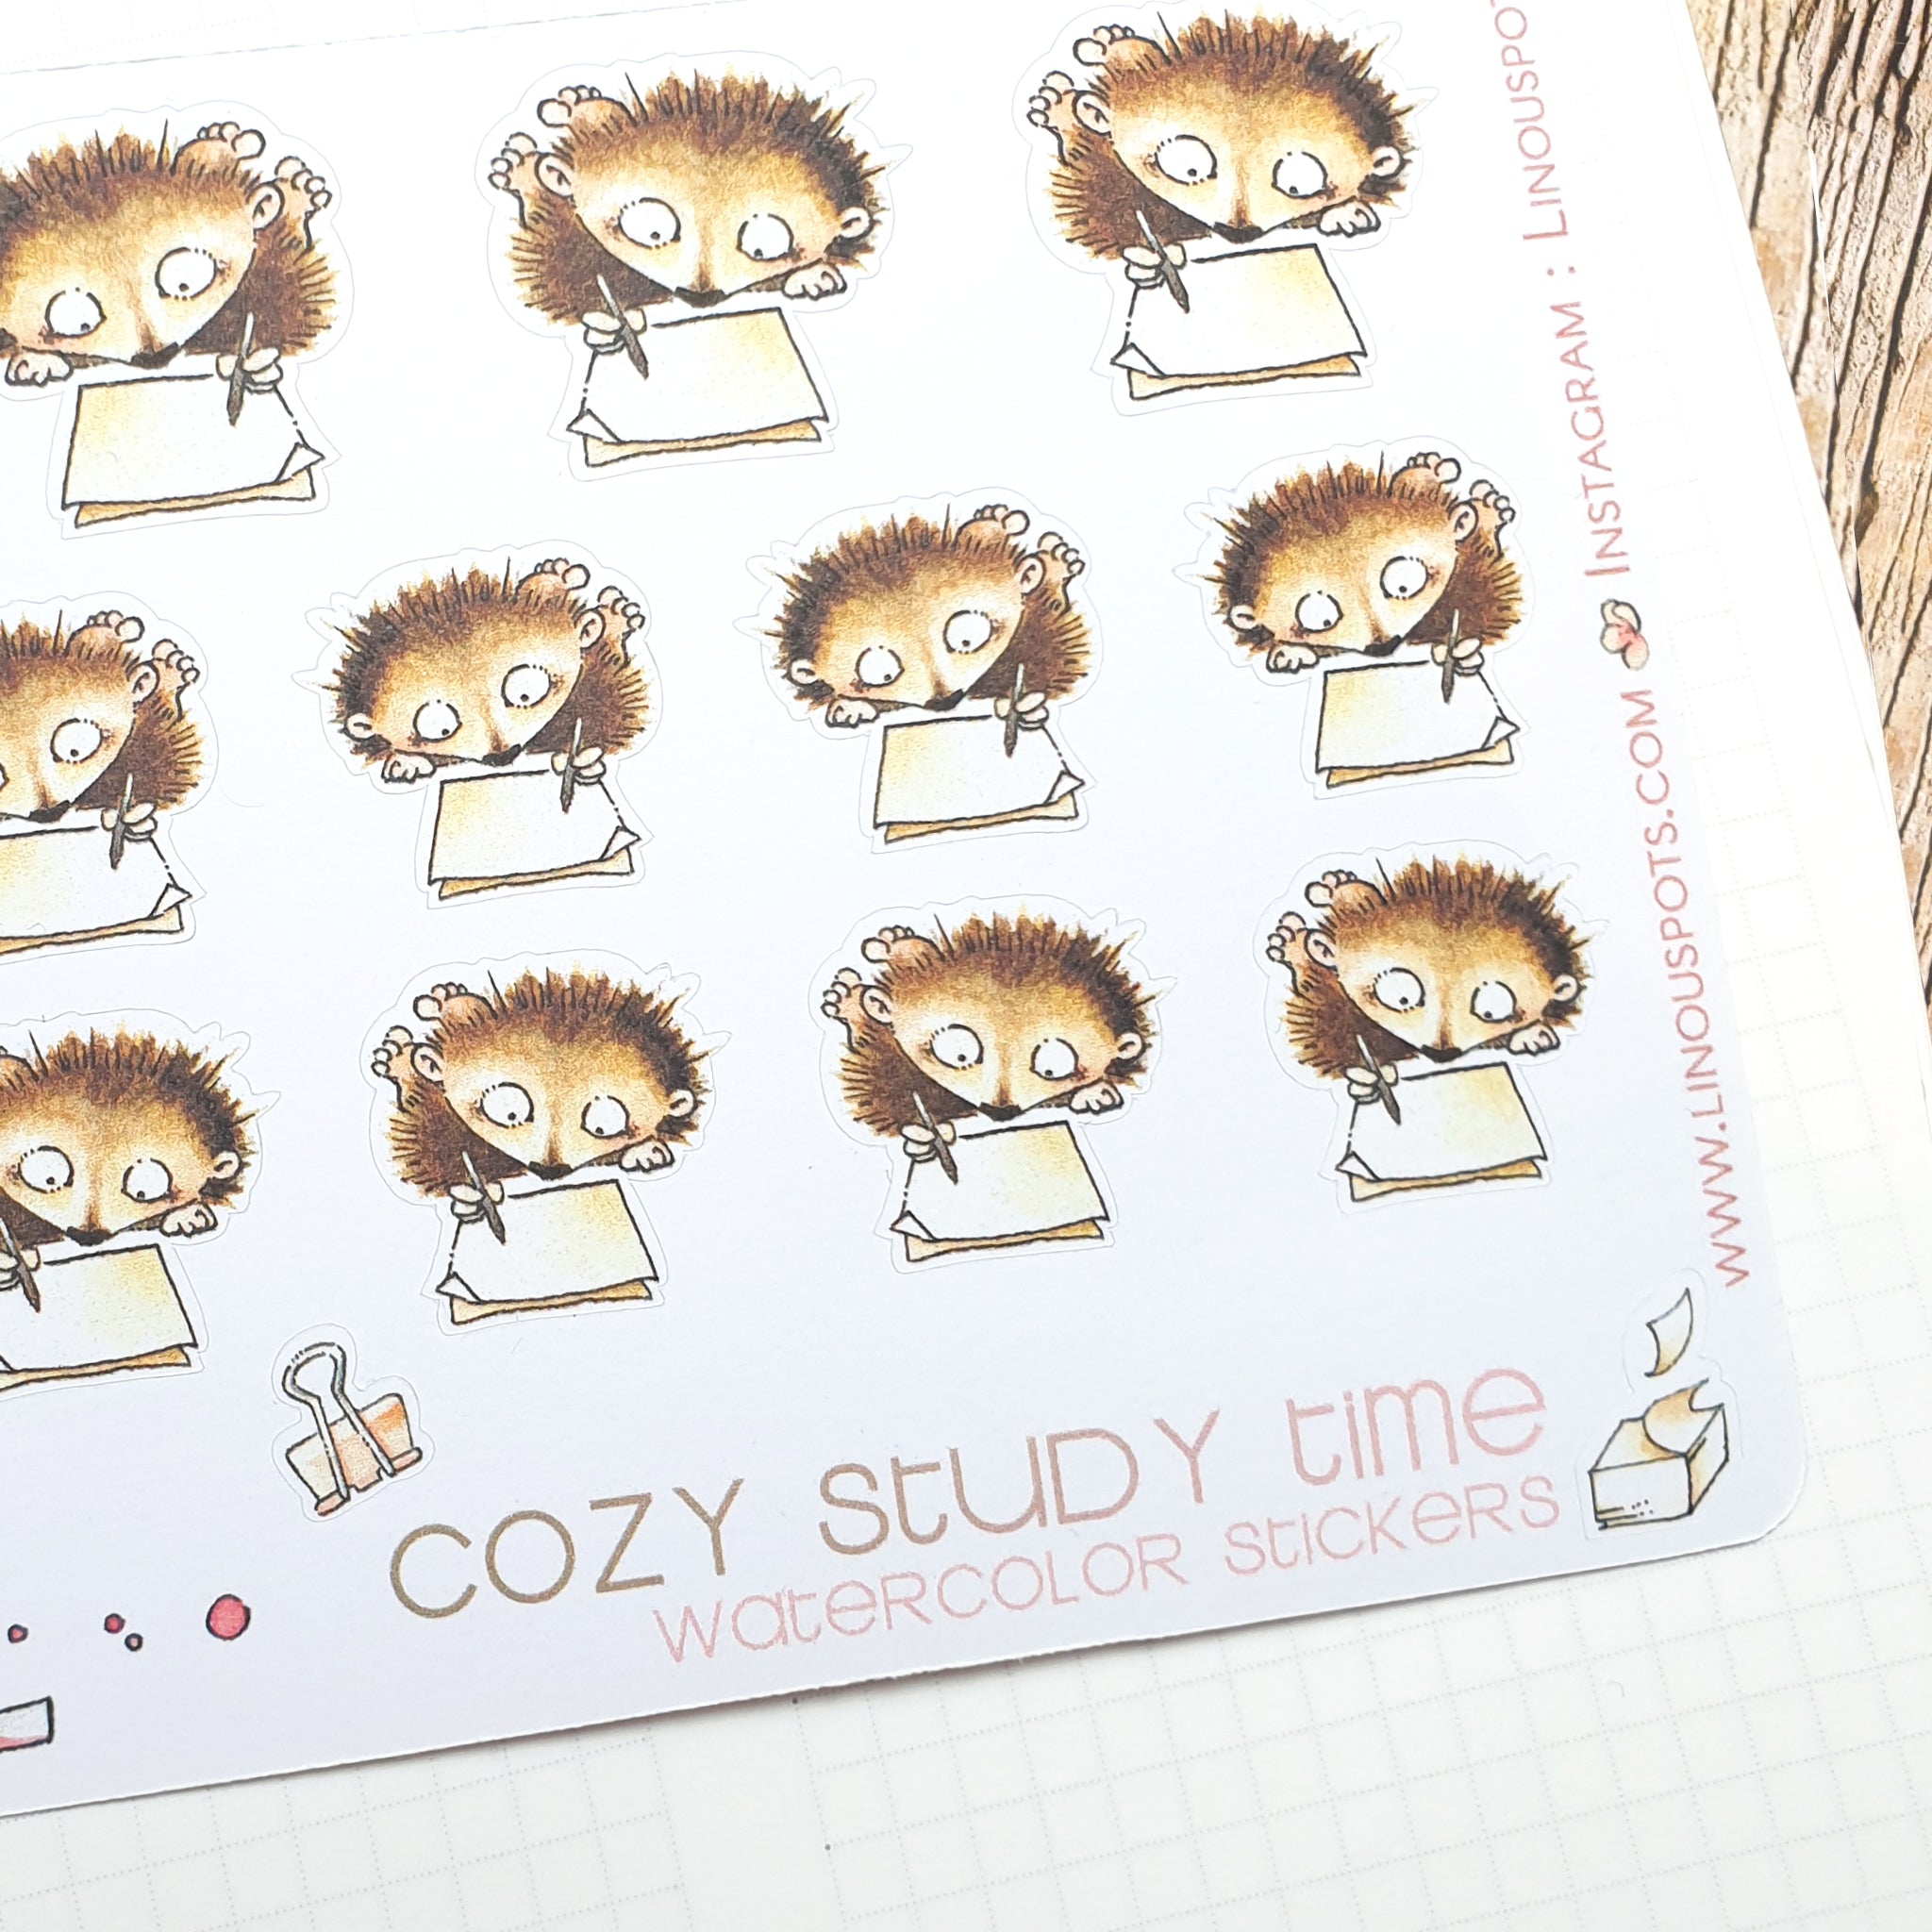 Second close up of watercolor stickers with writing hedgehogs